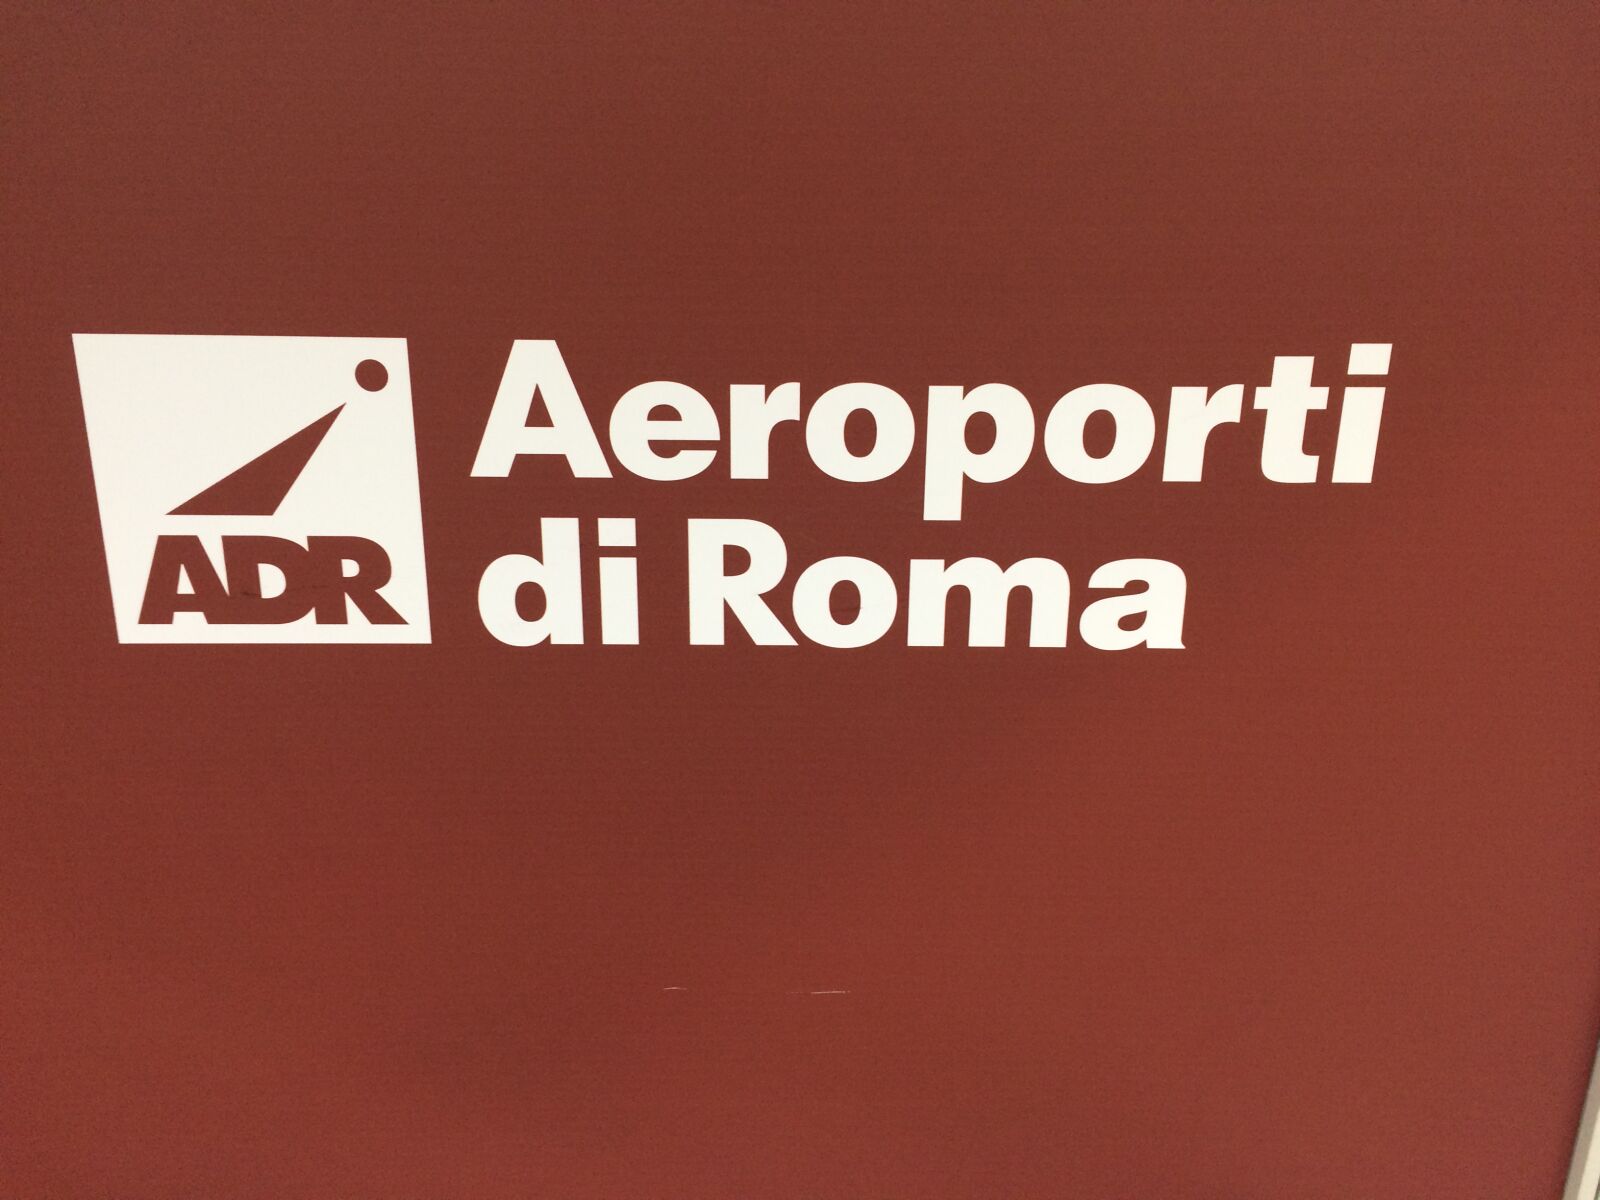 iPhone 5s back camera 4.15mm f/2.2 sample photo. Rome, airport, sign photography